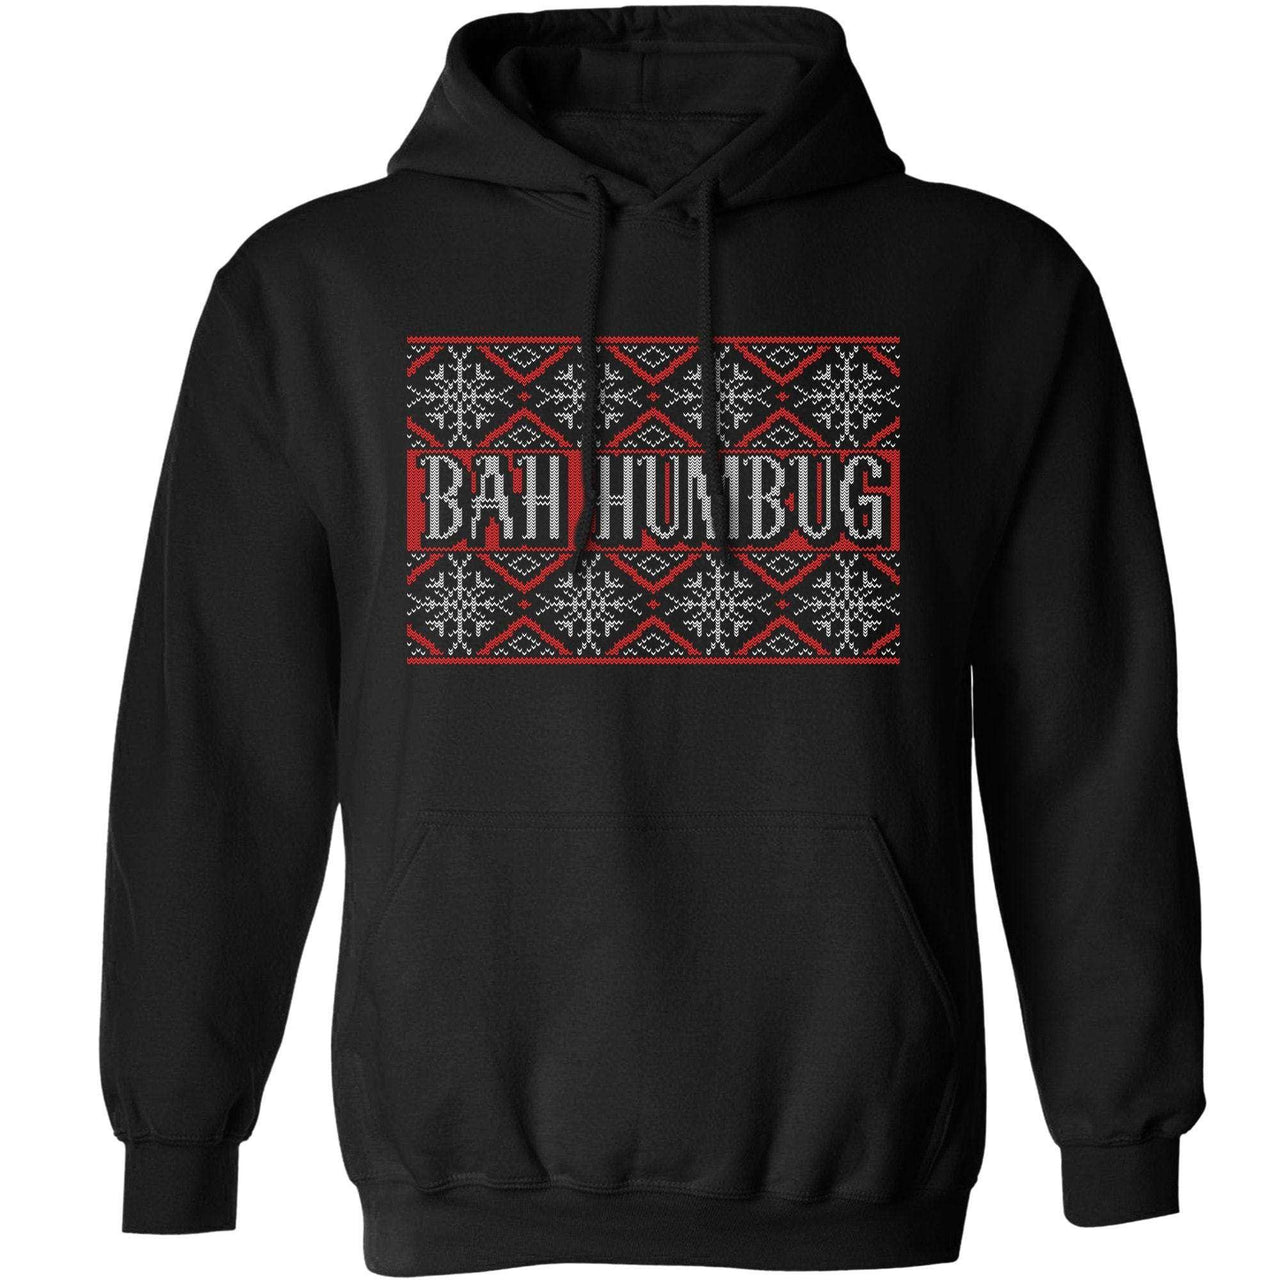 Bah Humbug Knitted Jumper Style Hoodie For Men and Women 8Ball